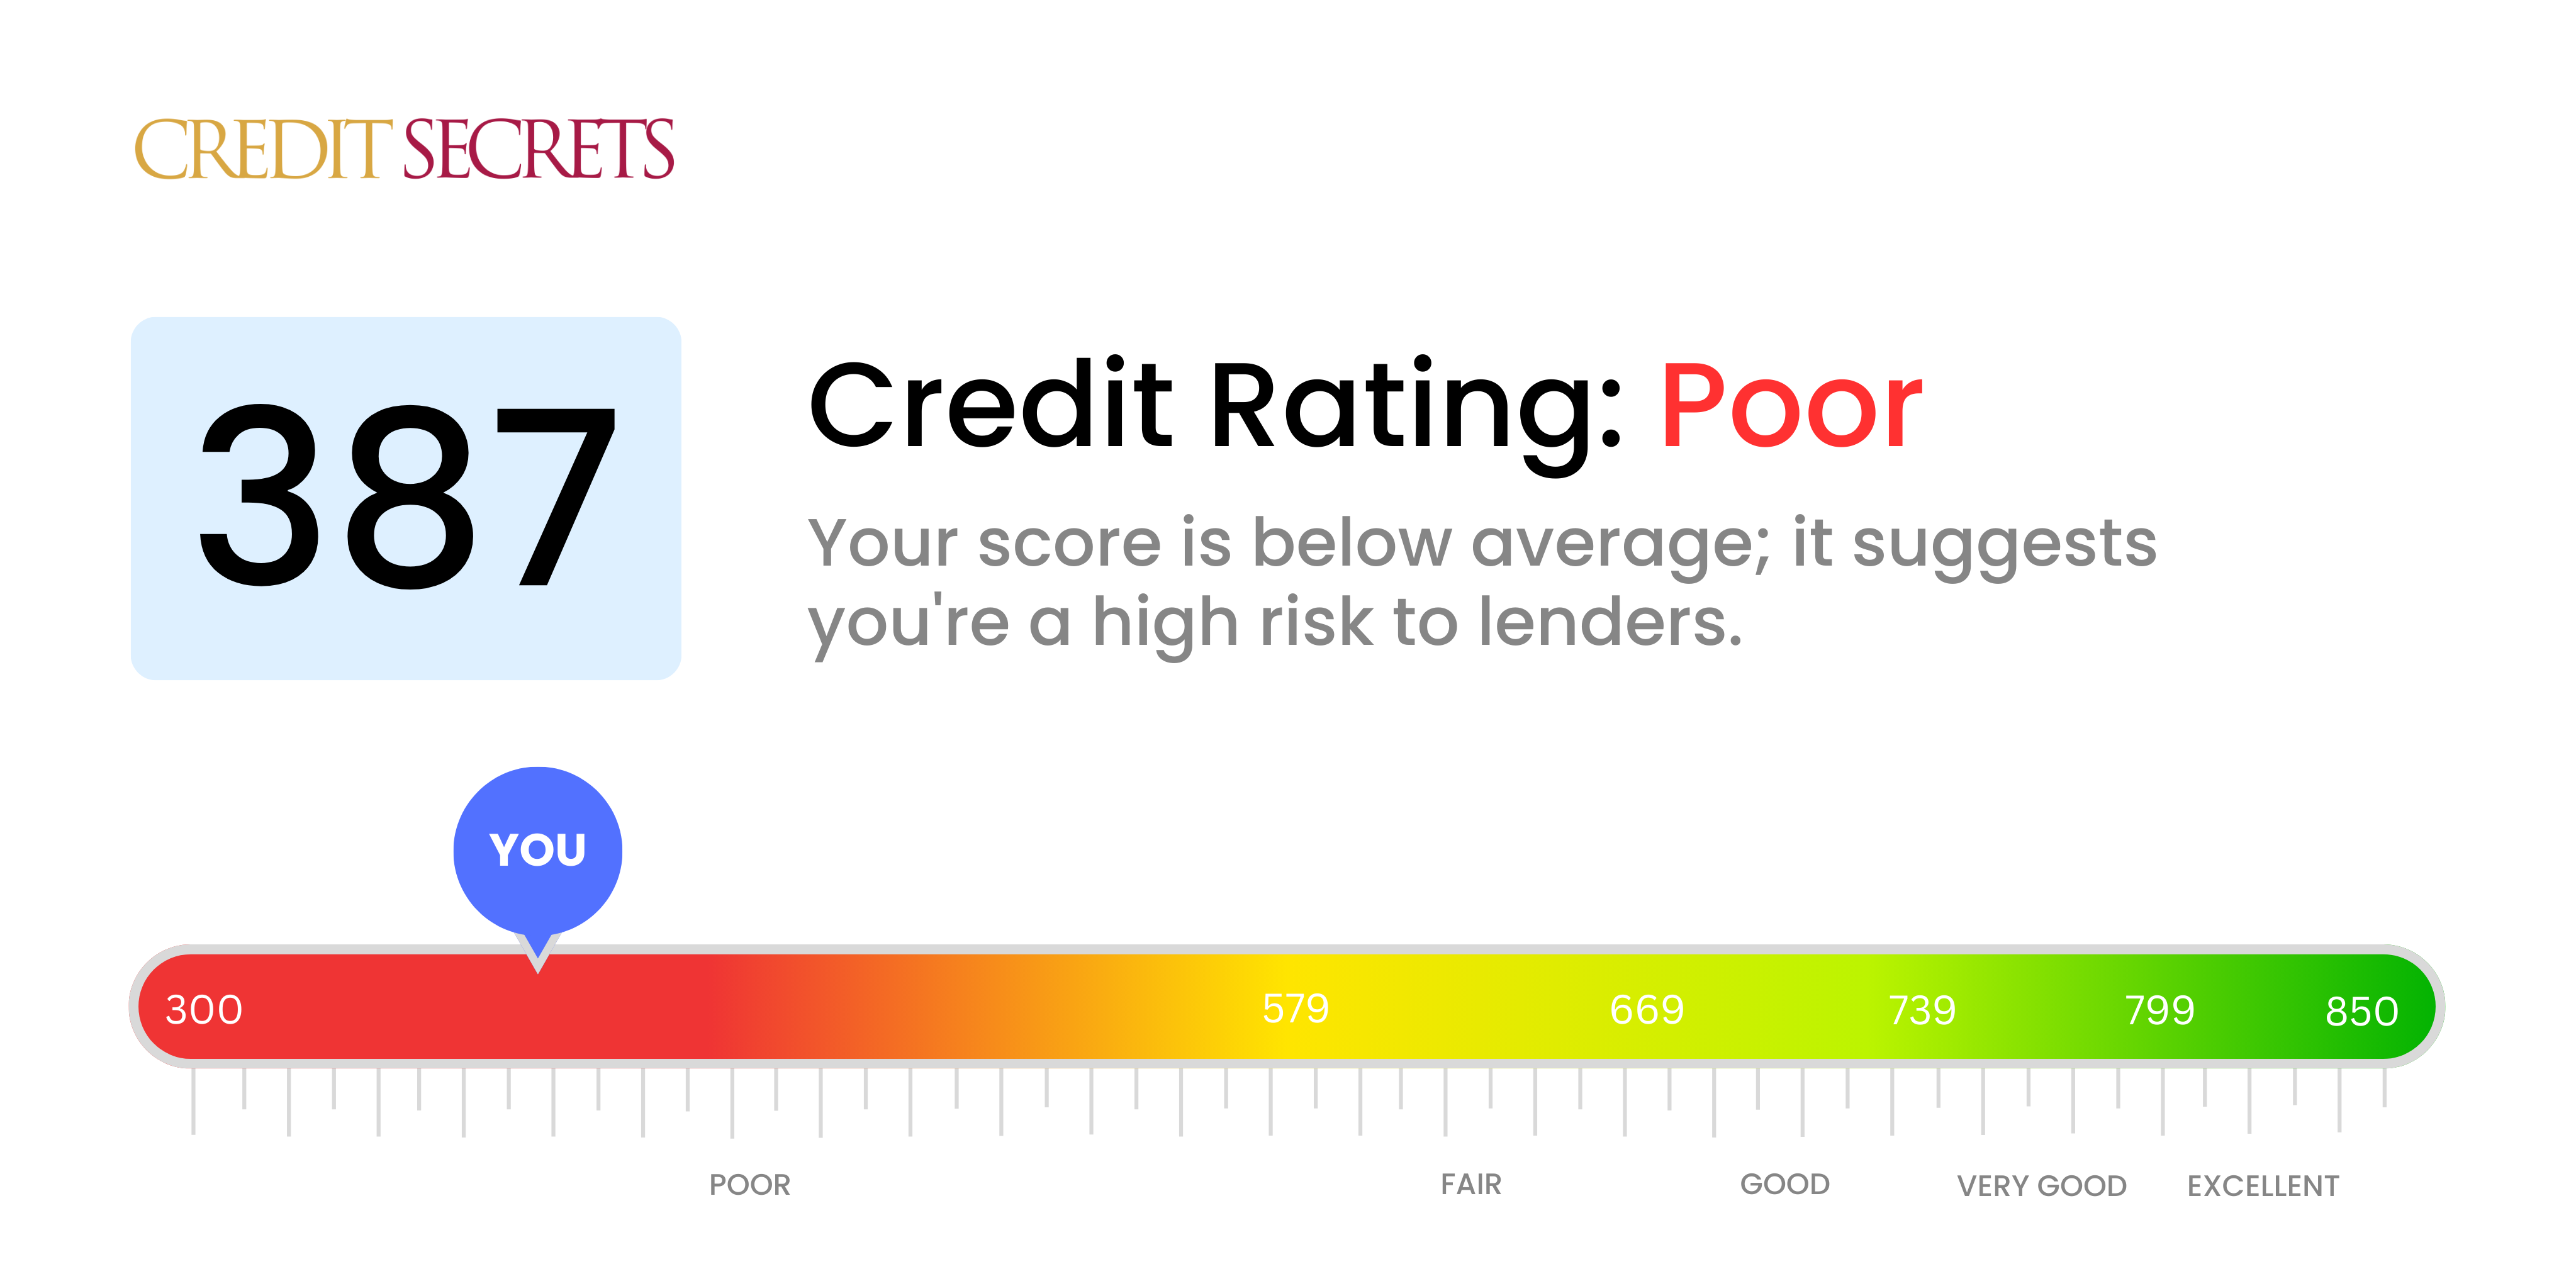 Is 387 a good credit score?